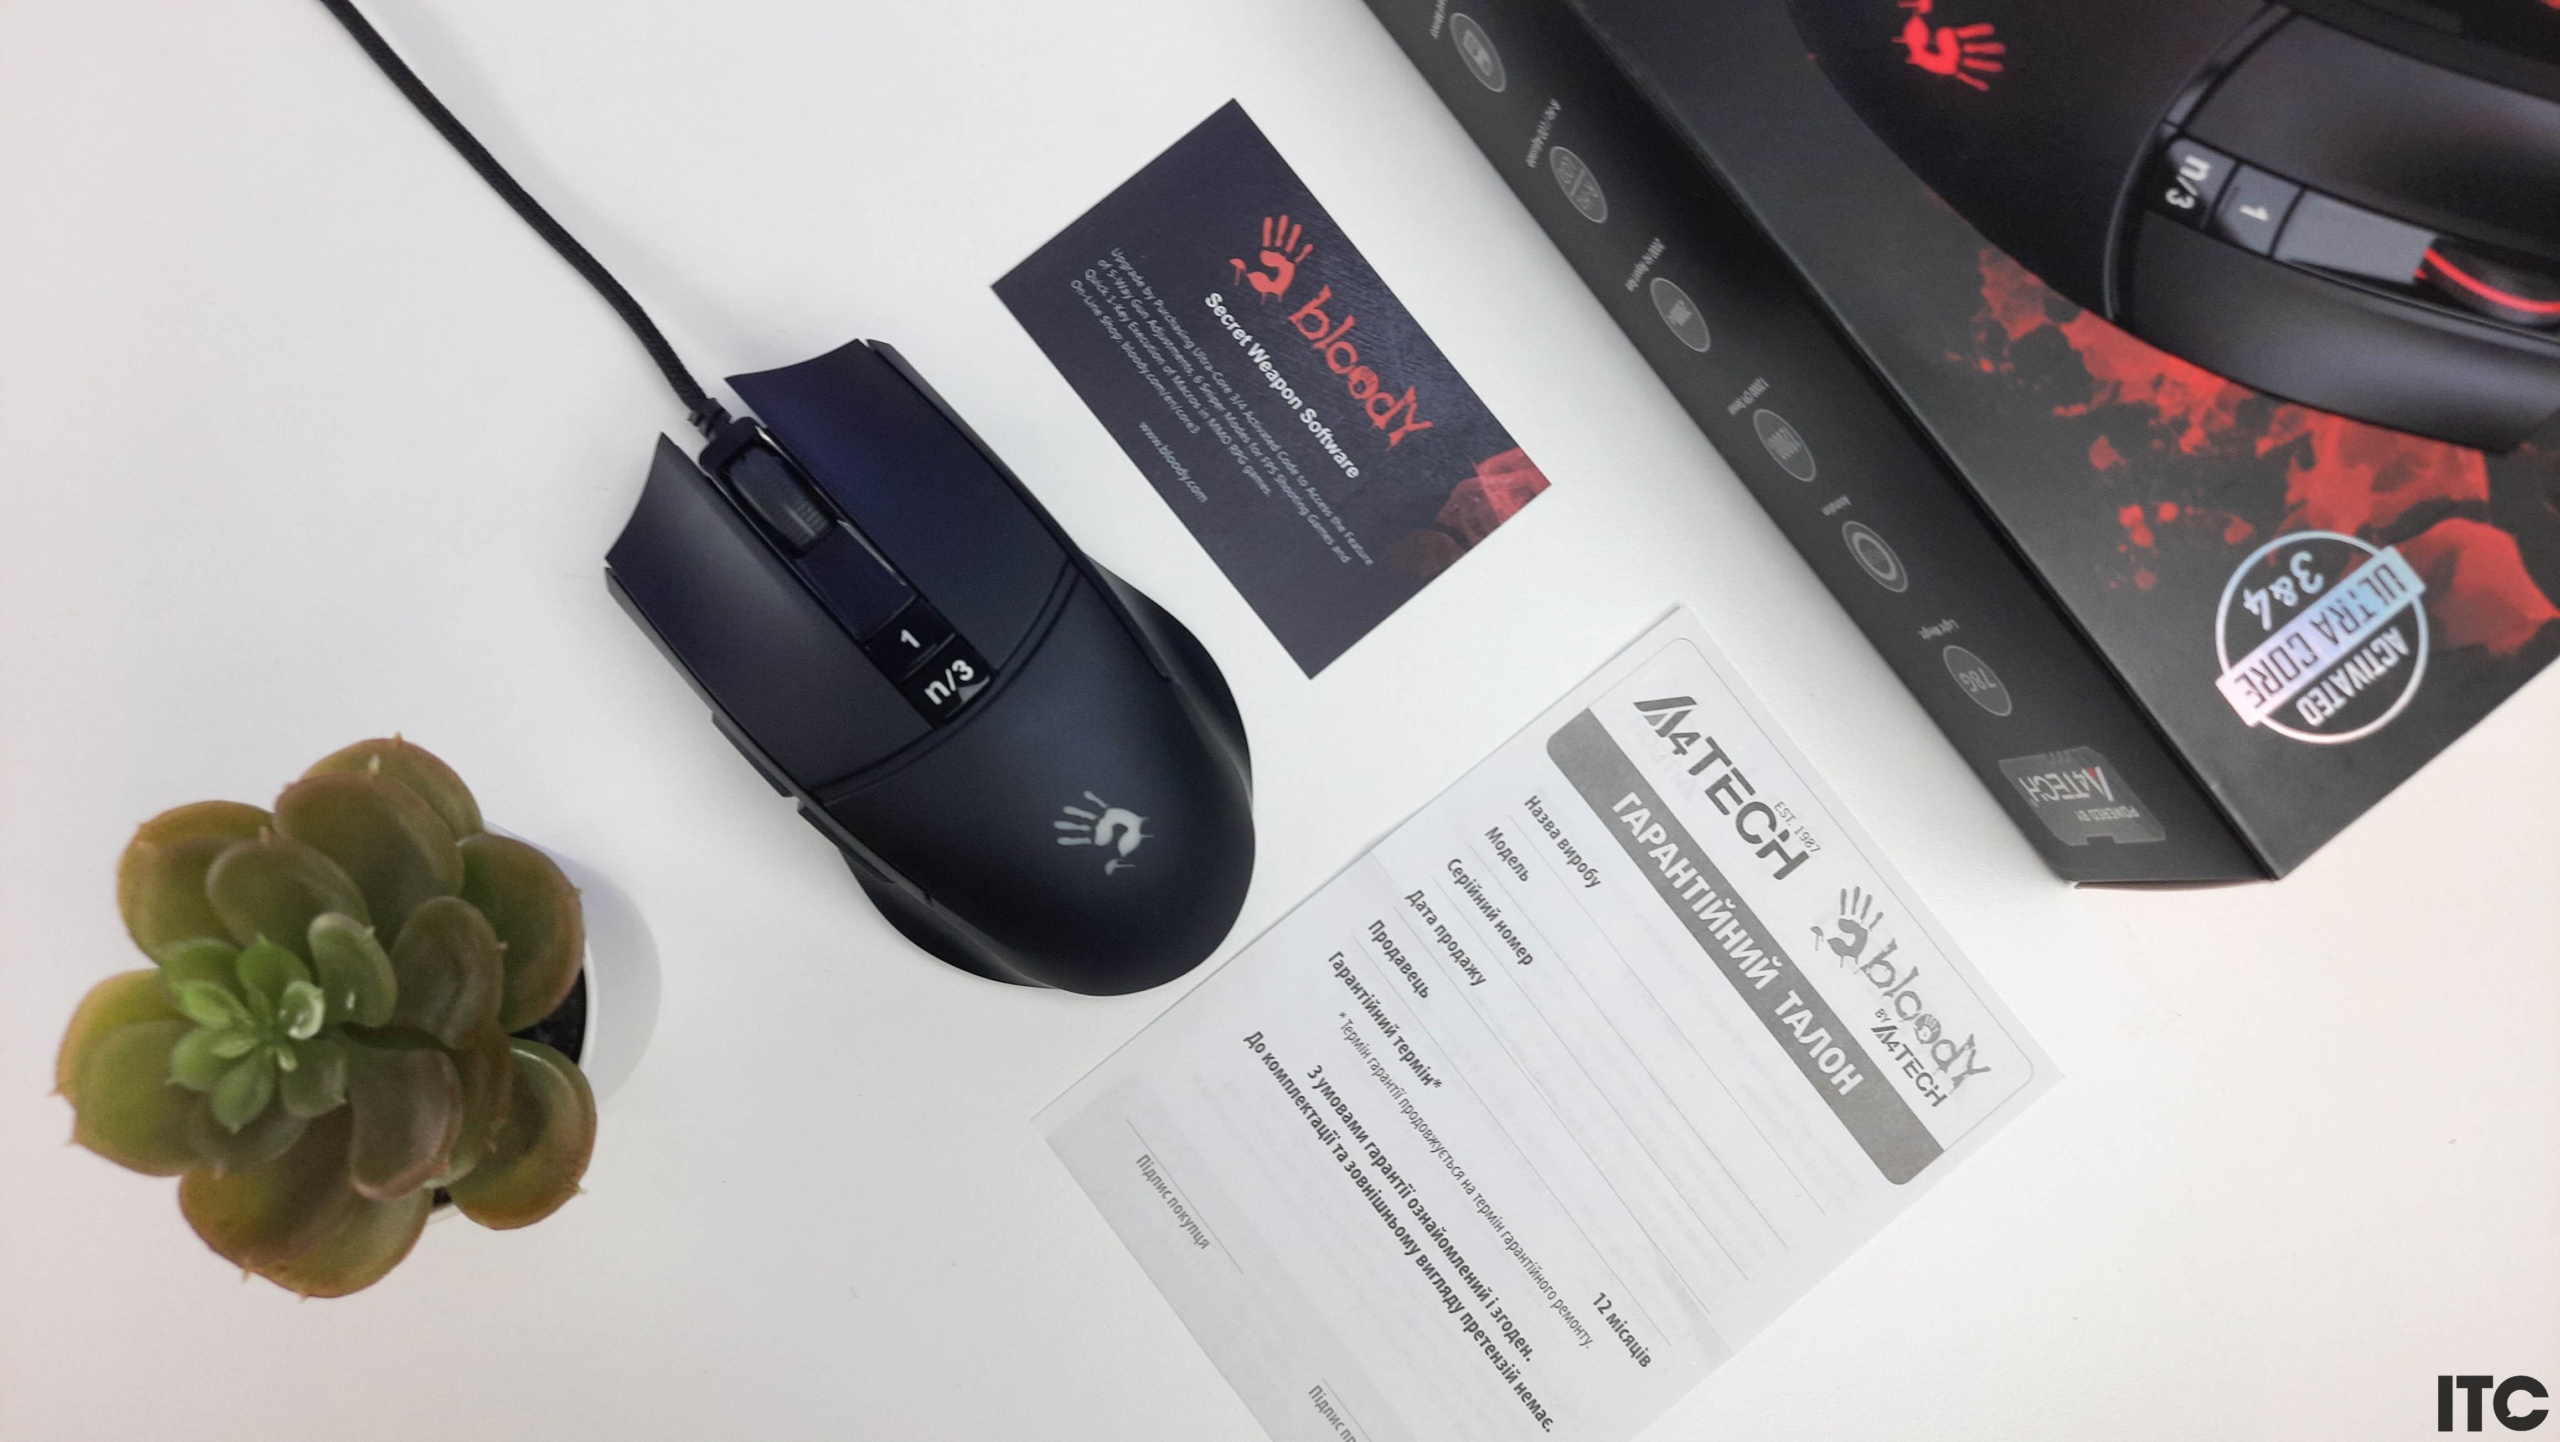 Disconnected eac blacklisted device bloody mouse a4tech rust что делать фото 34